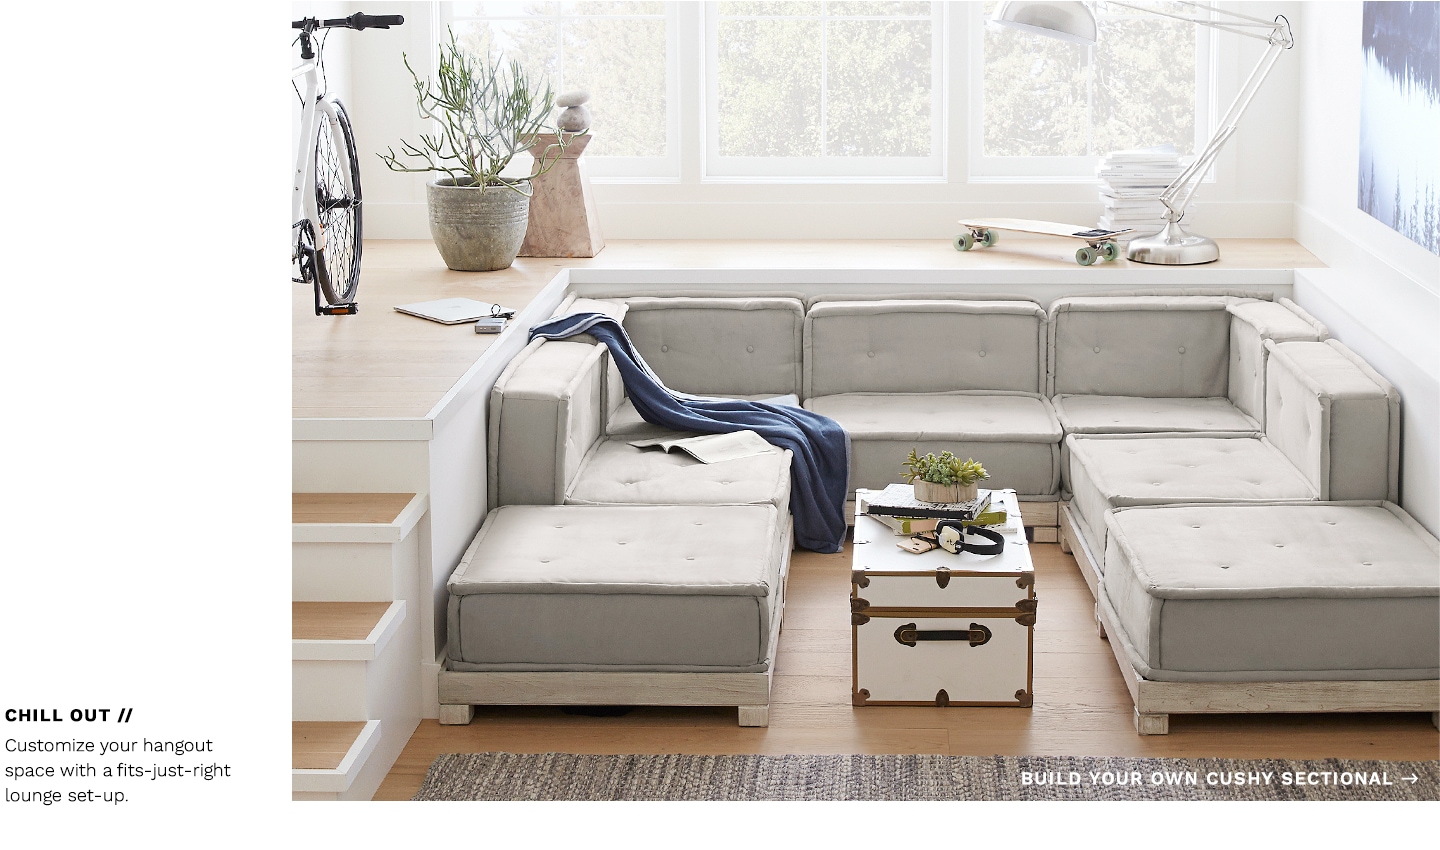 Build Your Own Cushy Sectional